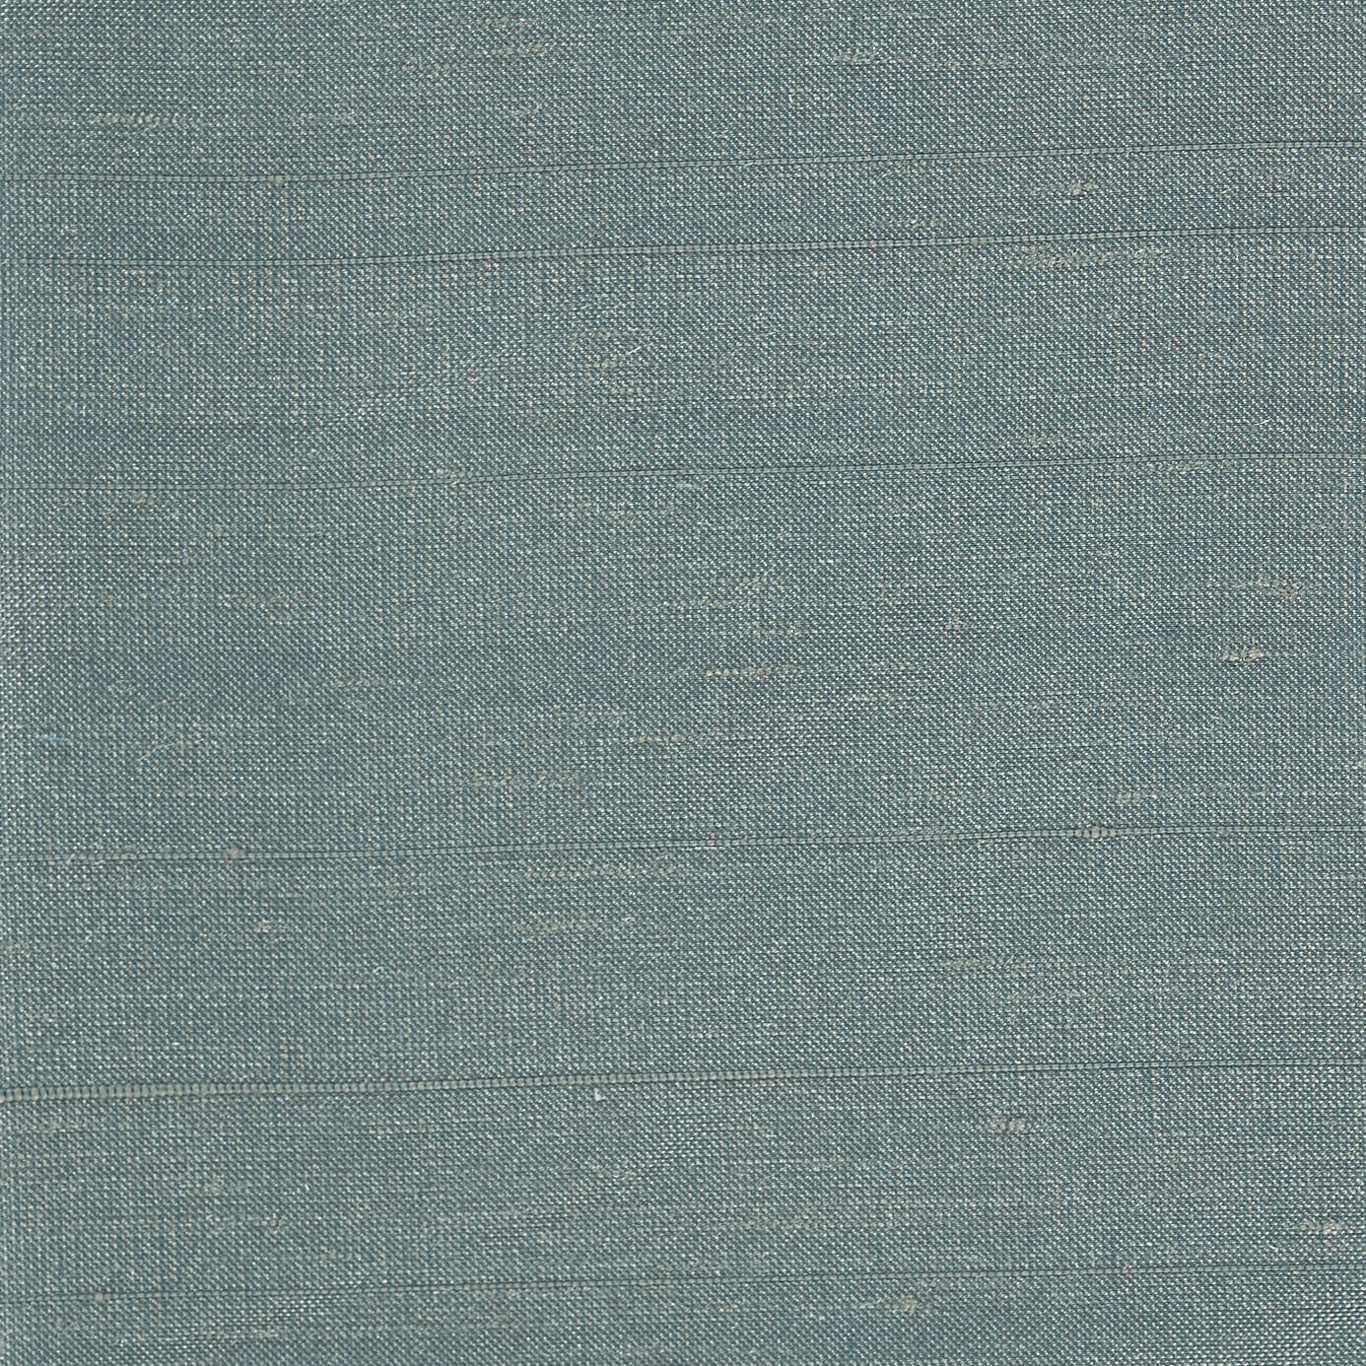 Deflect Fabric by Harlequin - HPOL440593 - Rubble